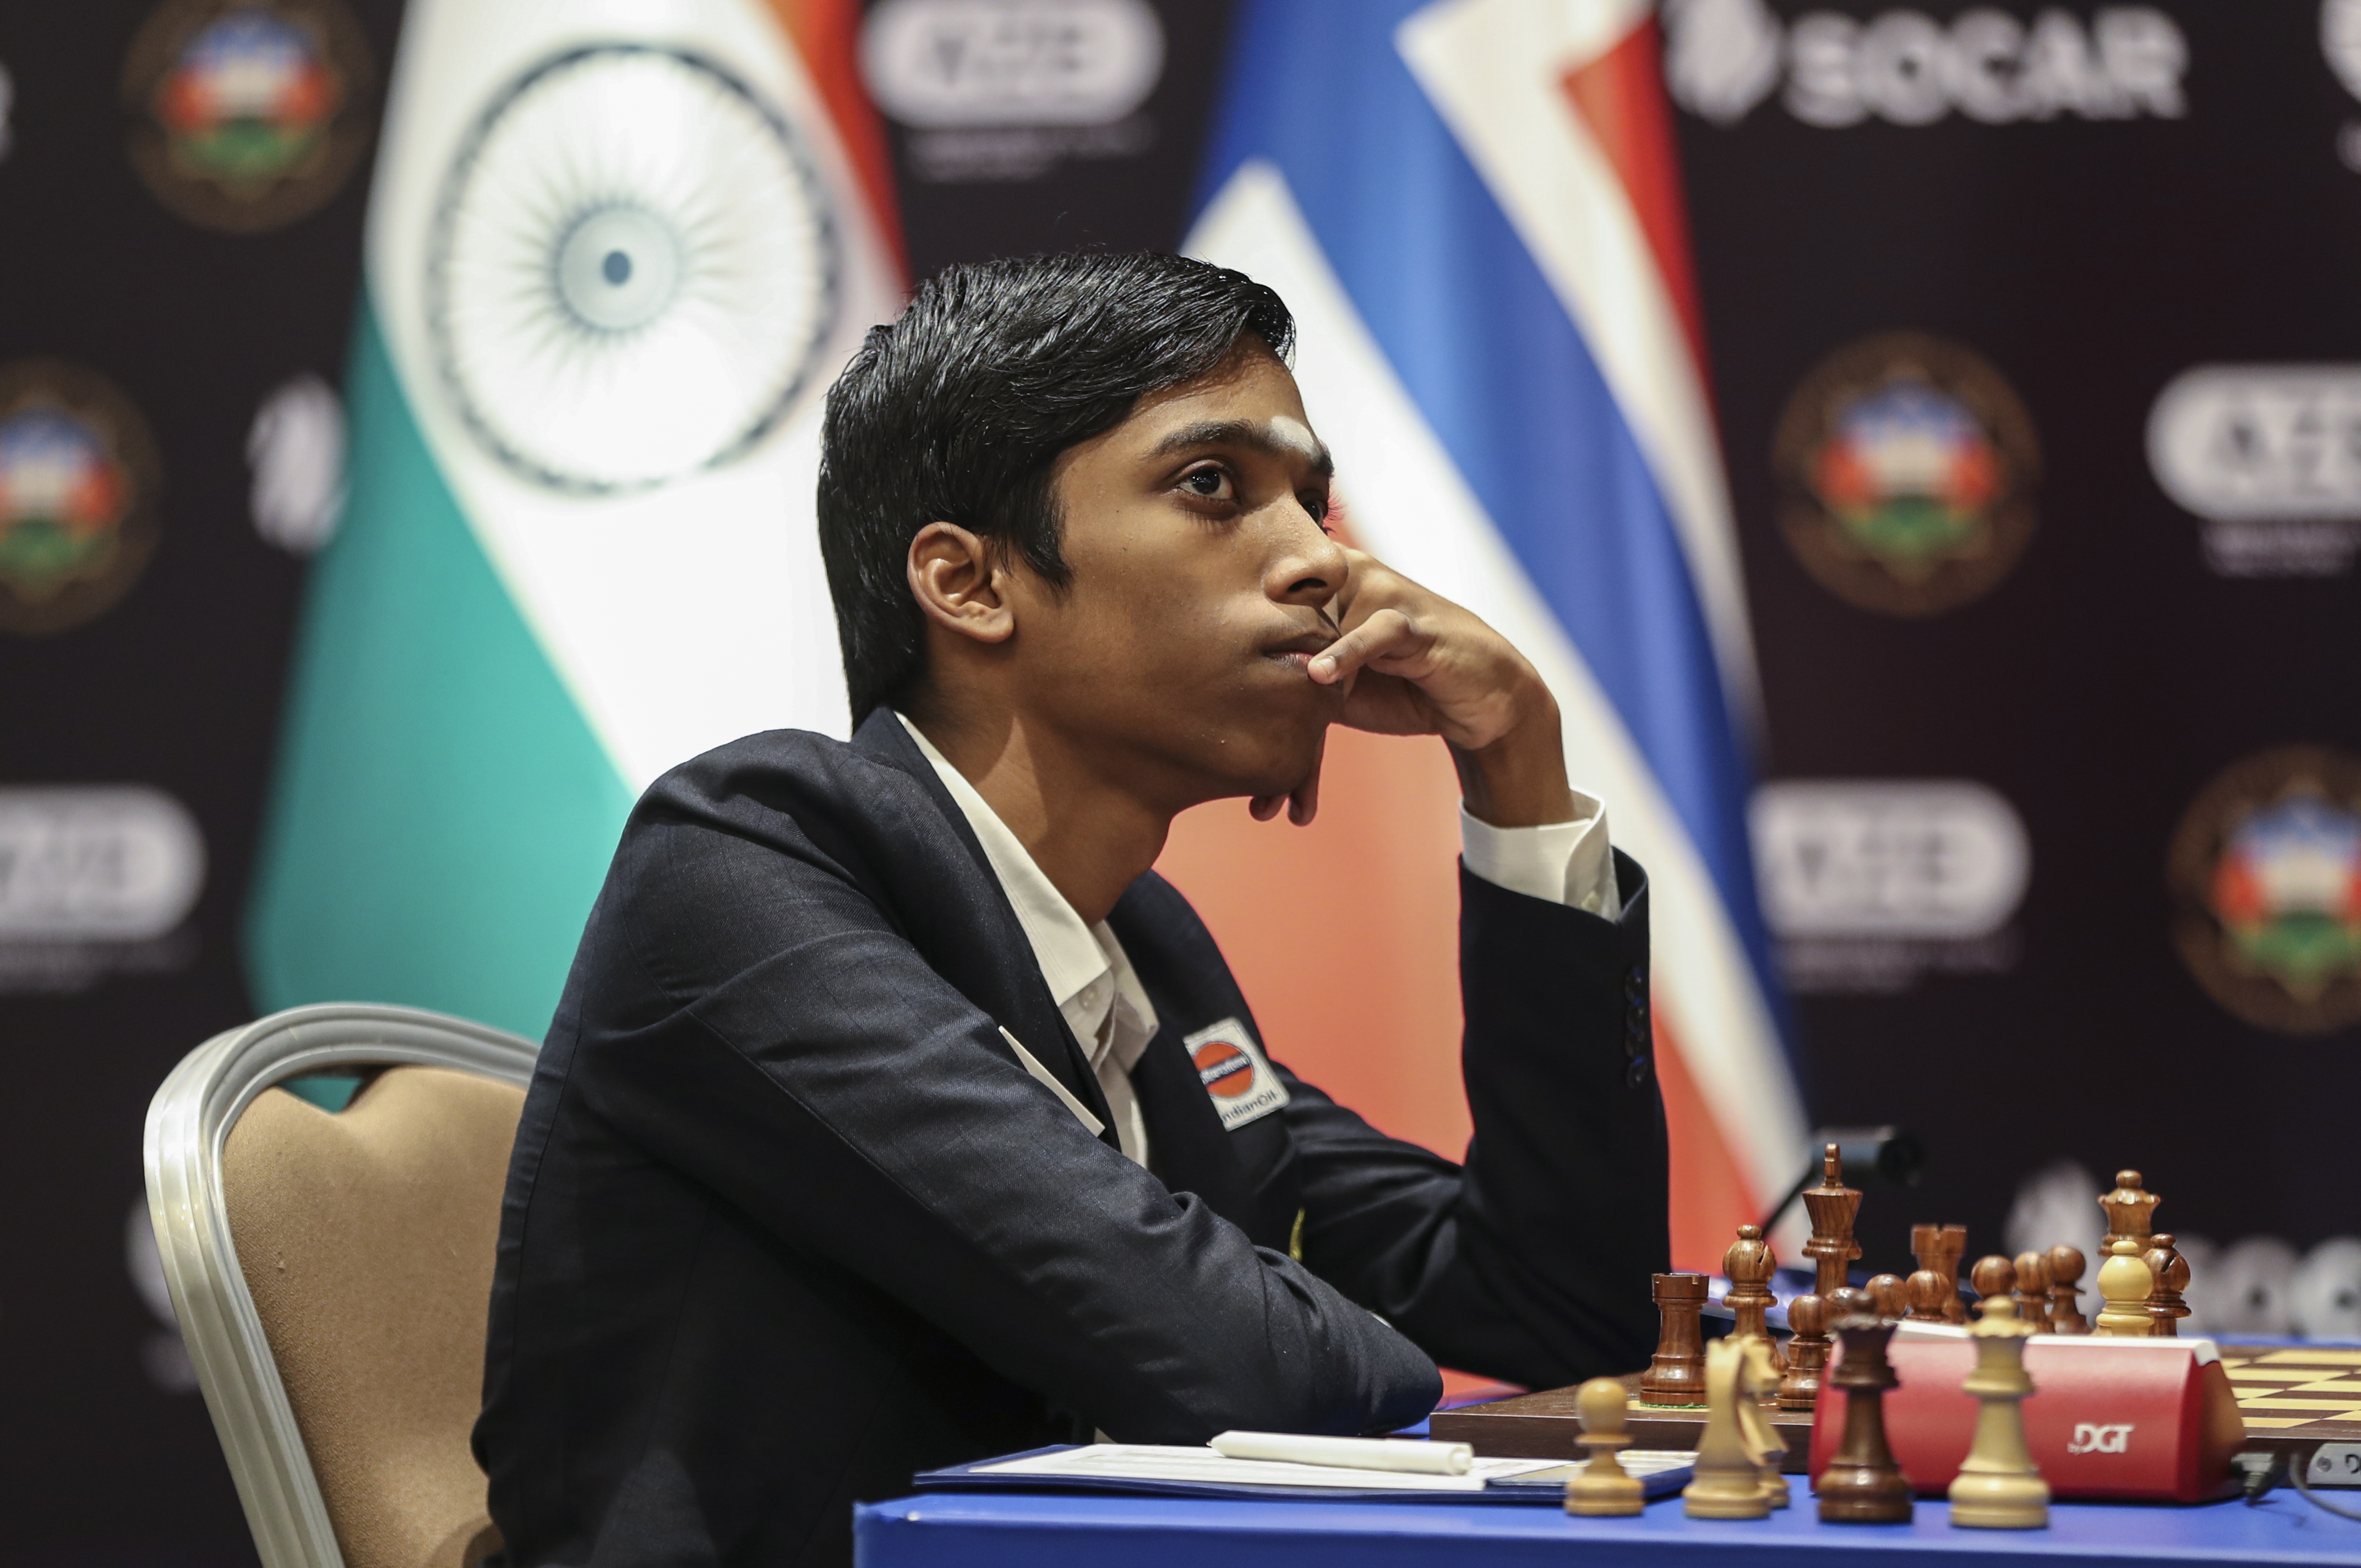 Praggnanandhaa (18) became the youngest Chess World Cup finalist